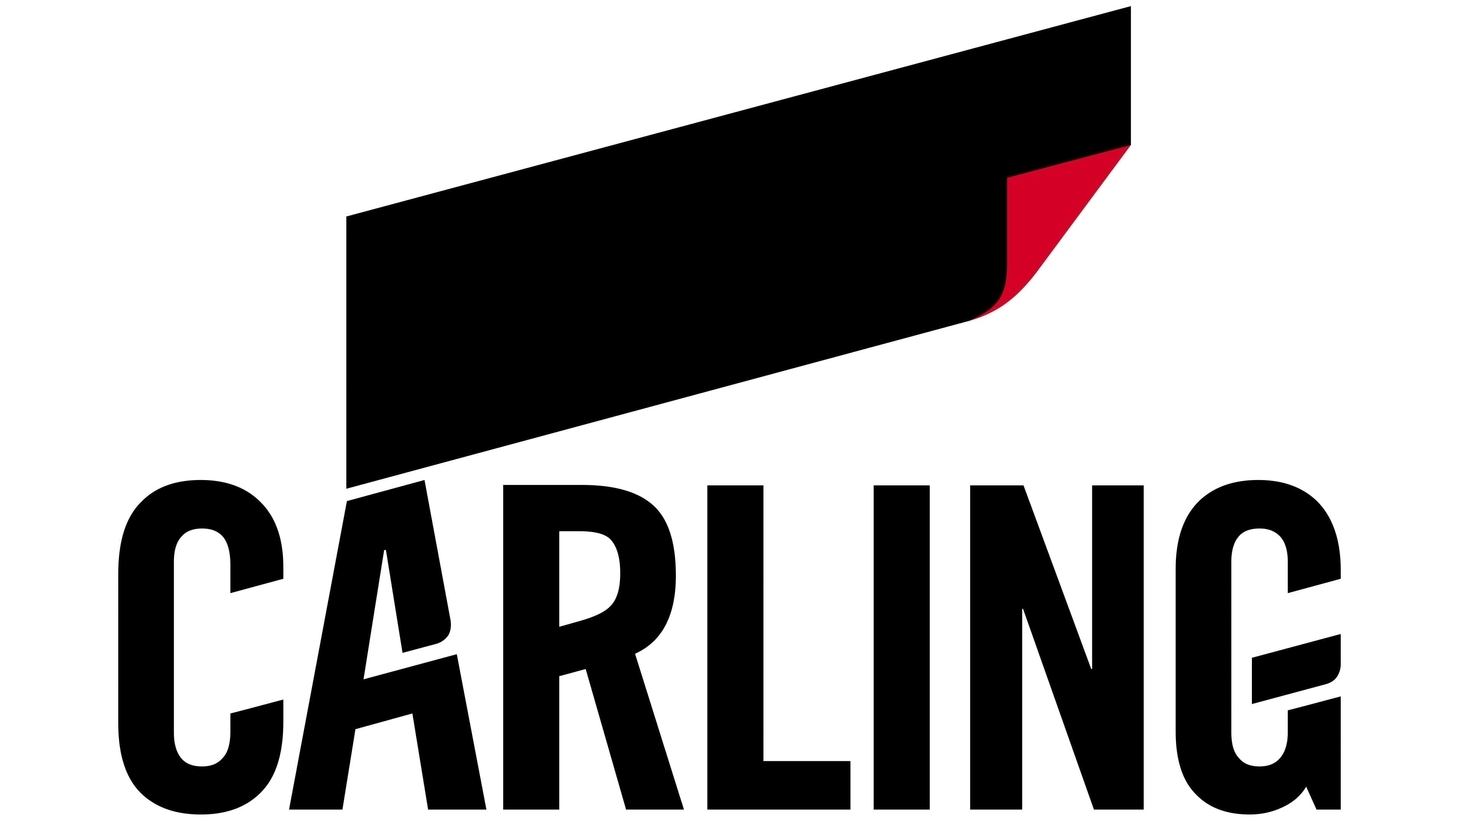 Carling sign 2017 present